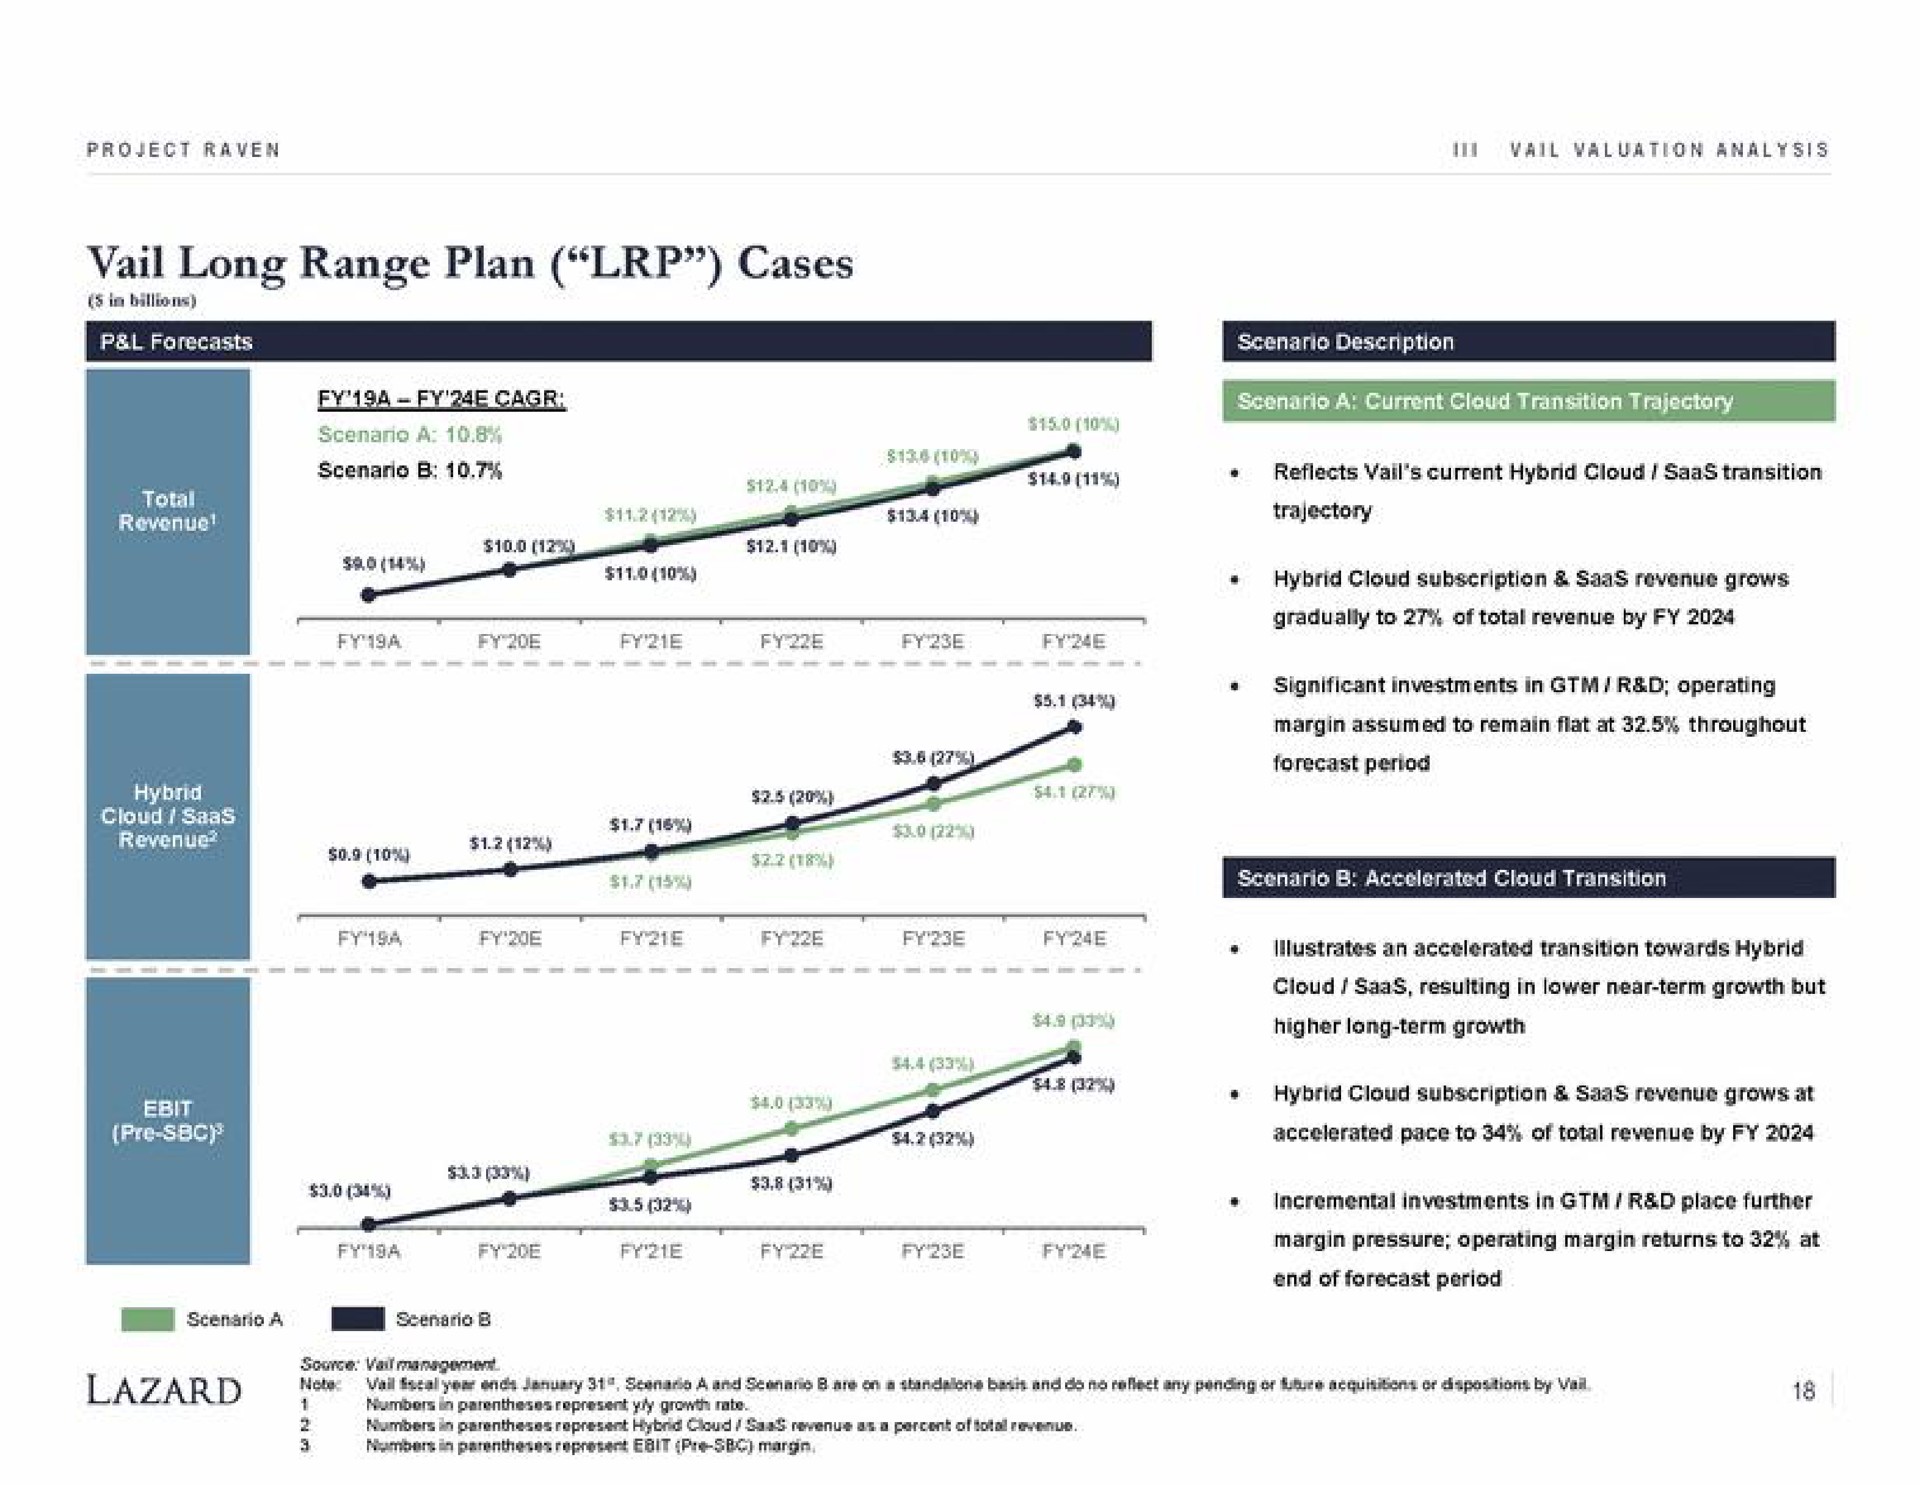 vail long range plan cases scenario a cate i vase reflects vail current hybrid cloud transition hybrid cloud subscription revenue grows illustrates an accelerated transition towards hybrid | Lazard